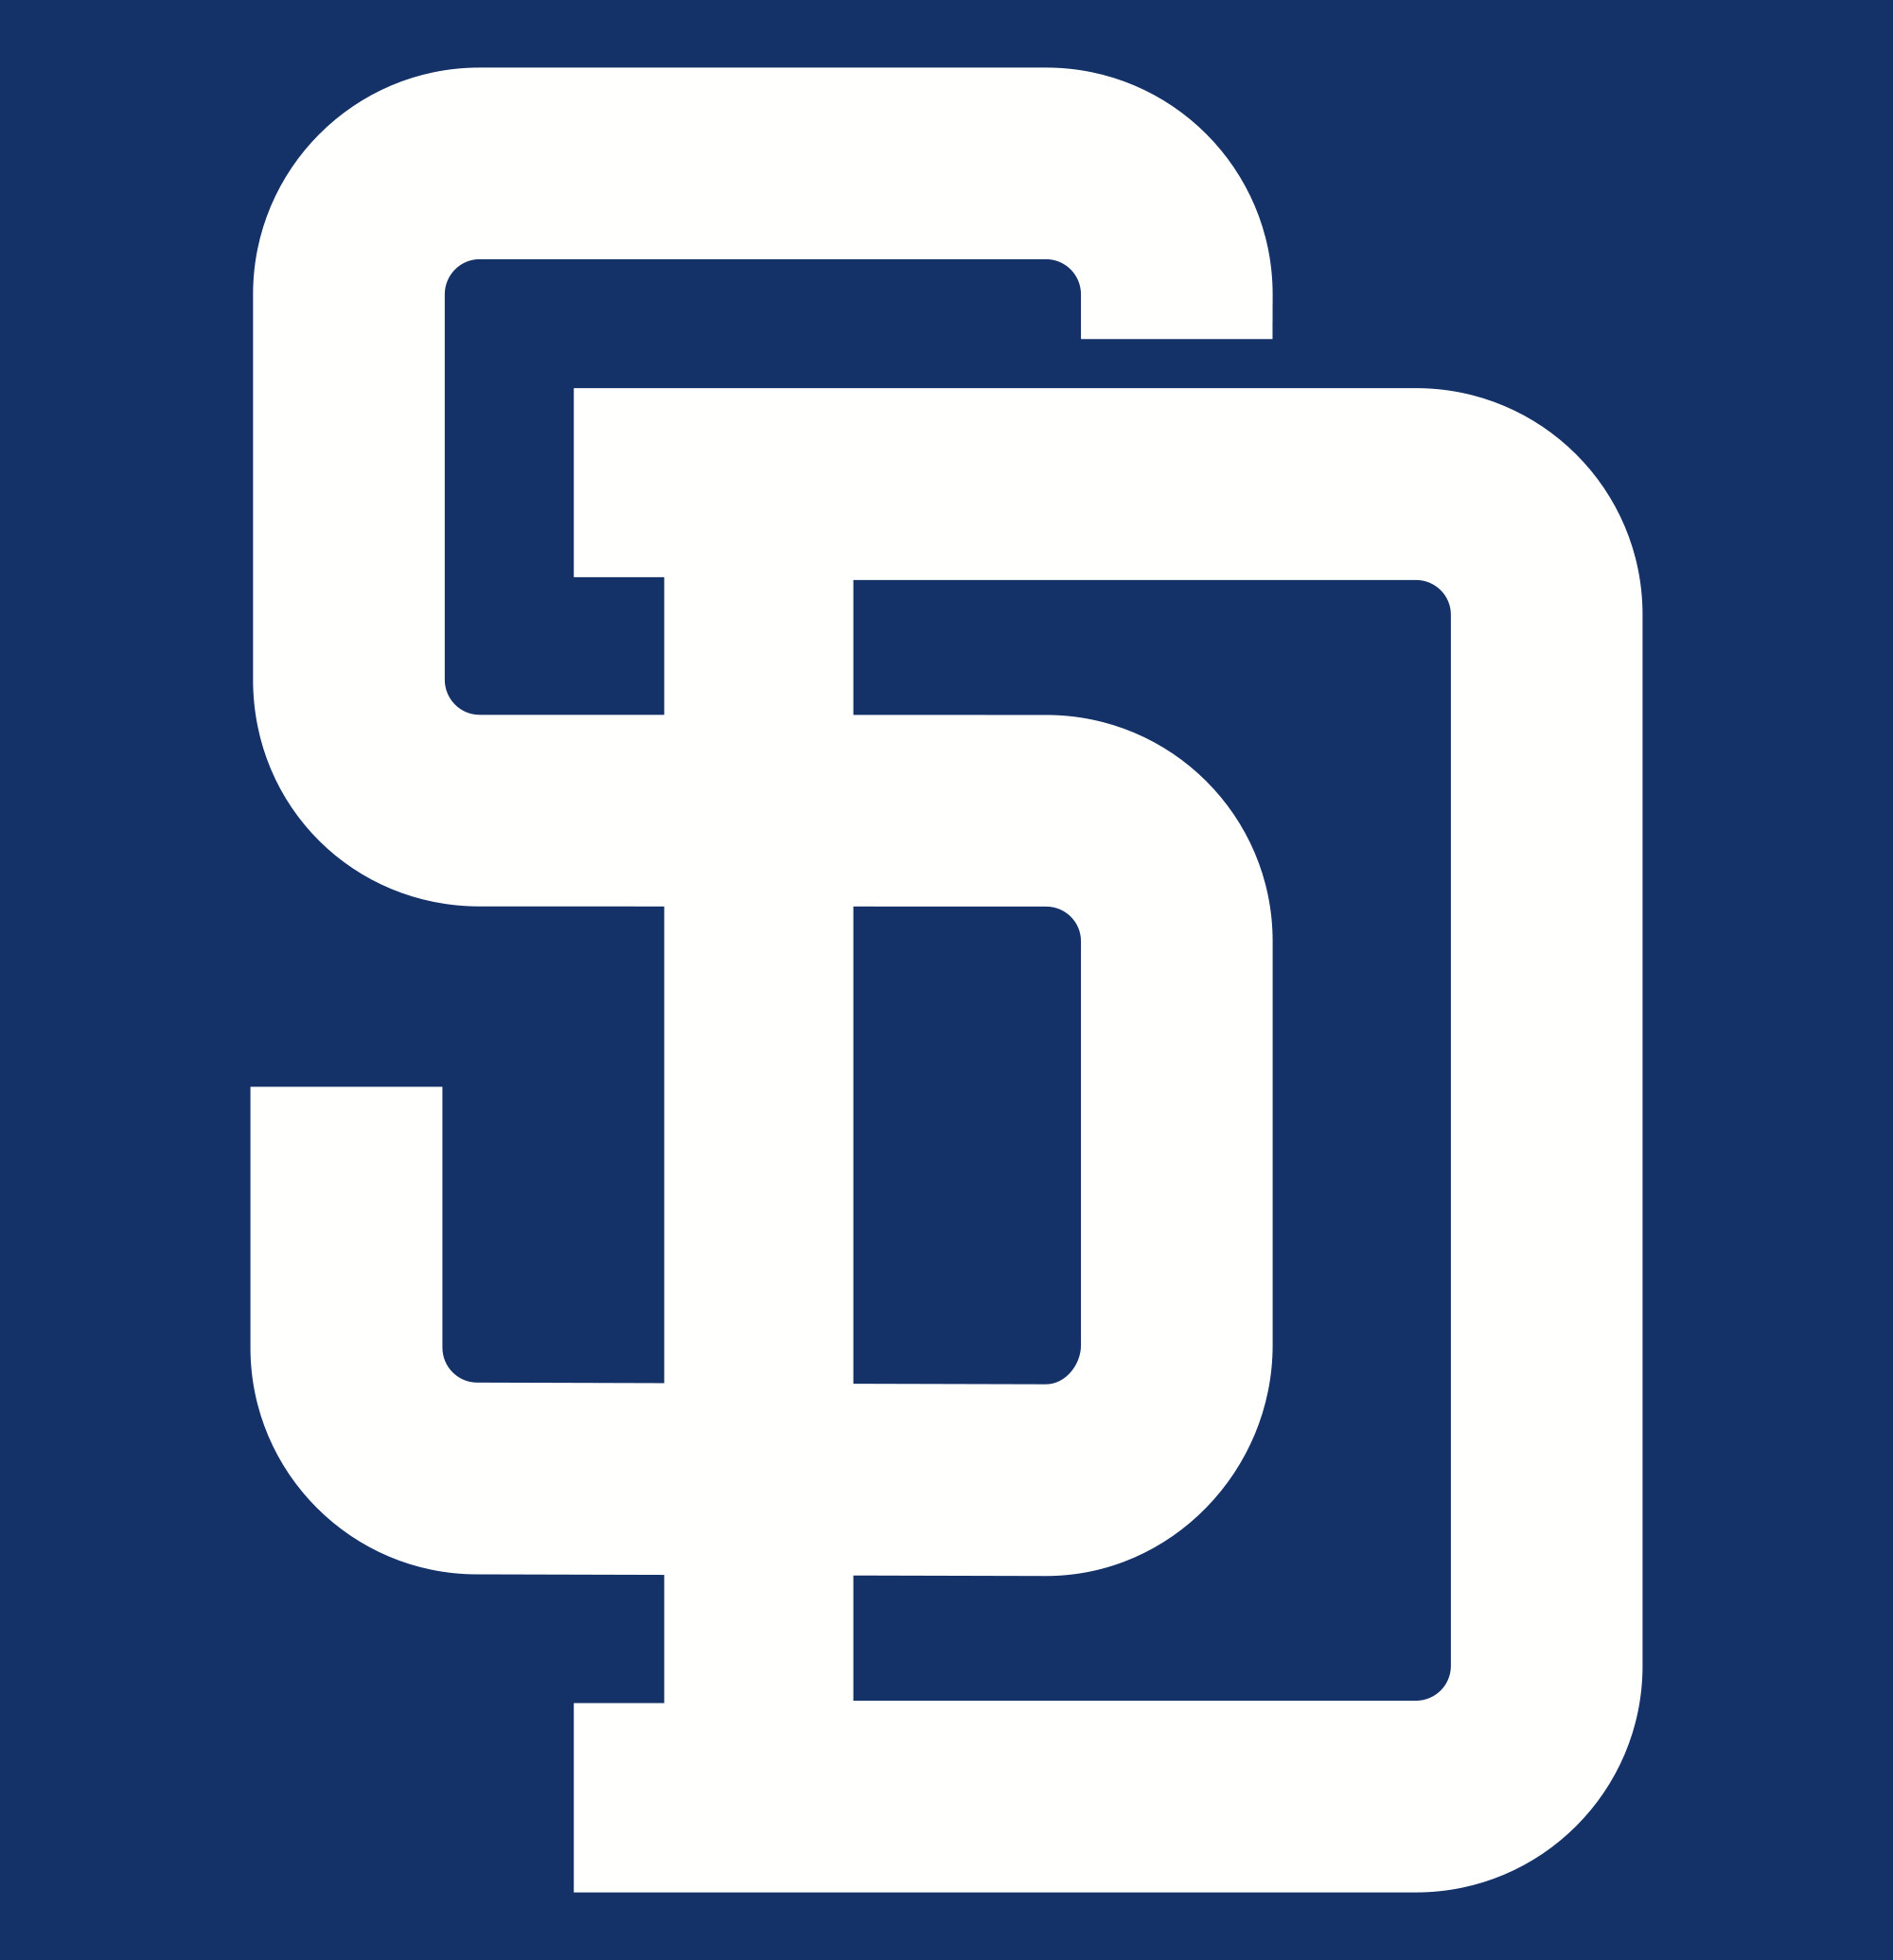 San Diego Padres Wallpaper 57 images